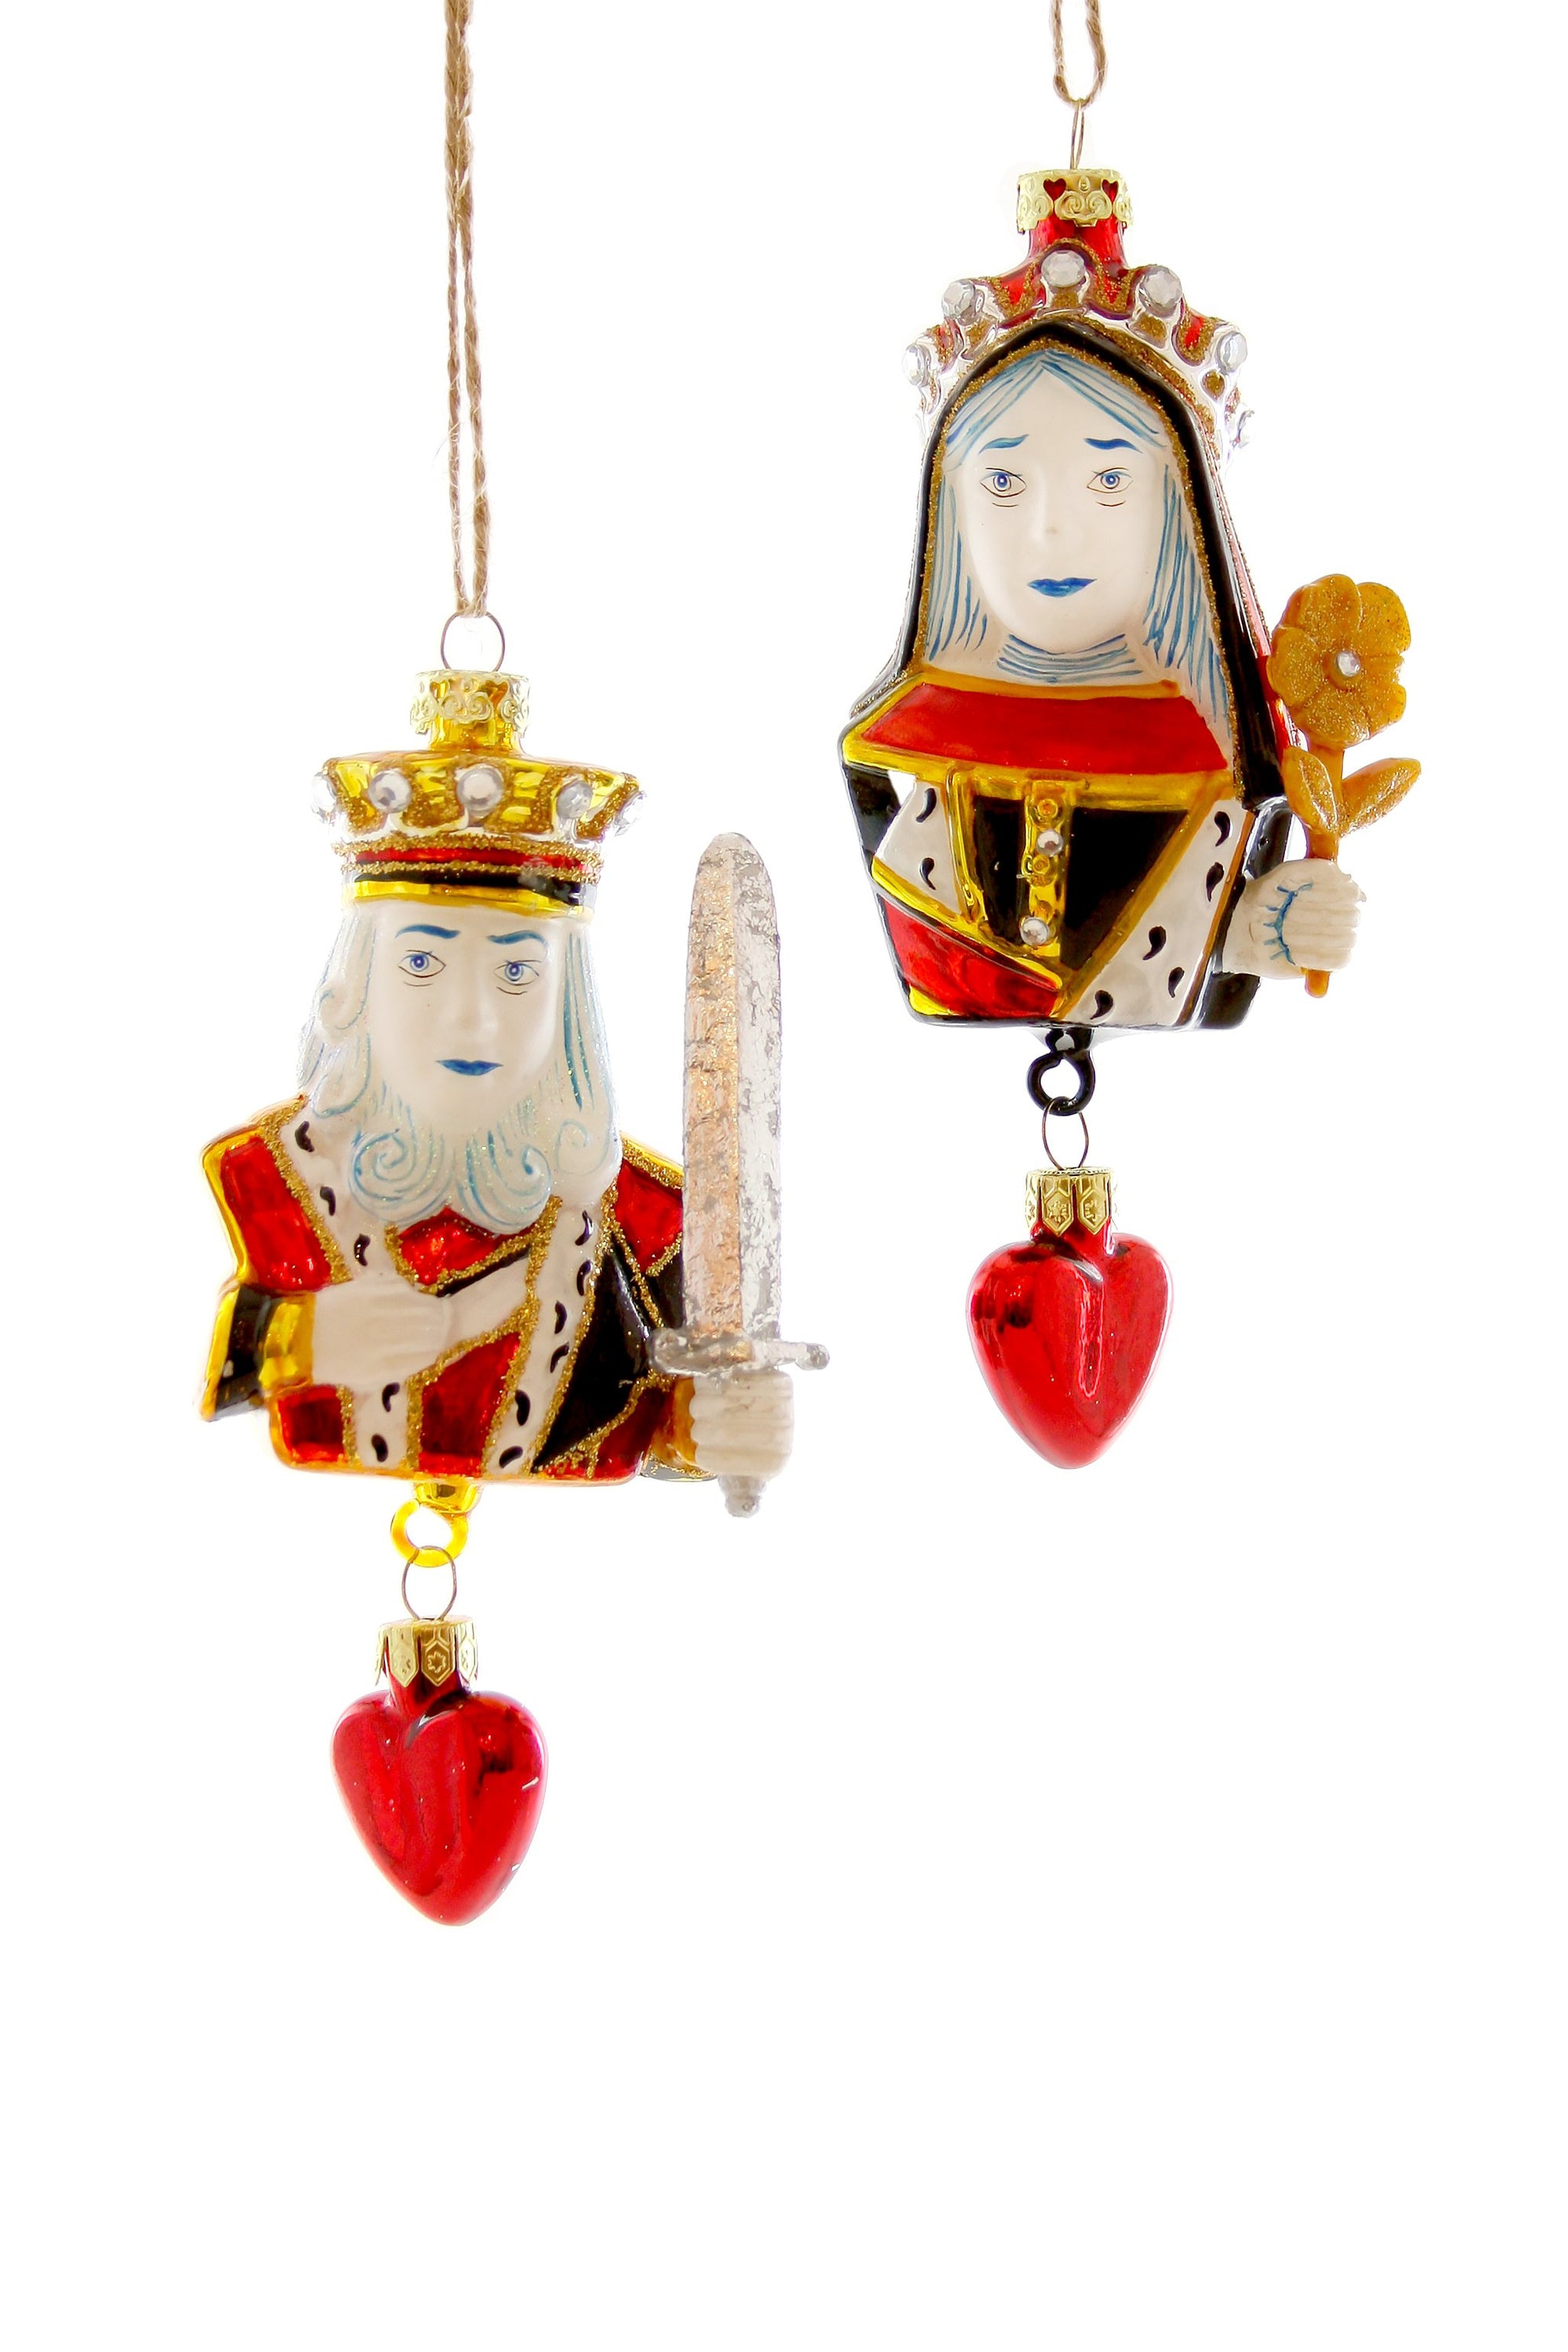 KING & QUEEN OF HEARTS - Sold as Pair